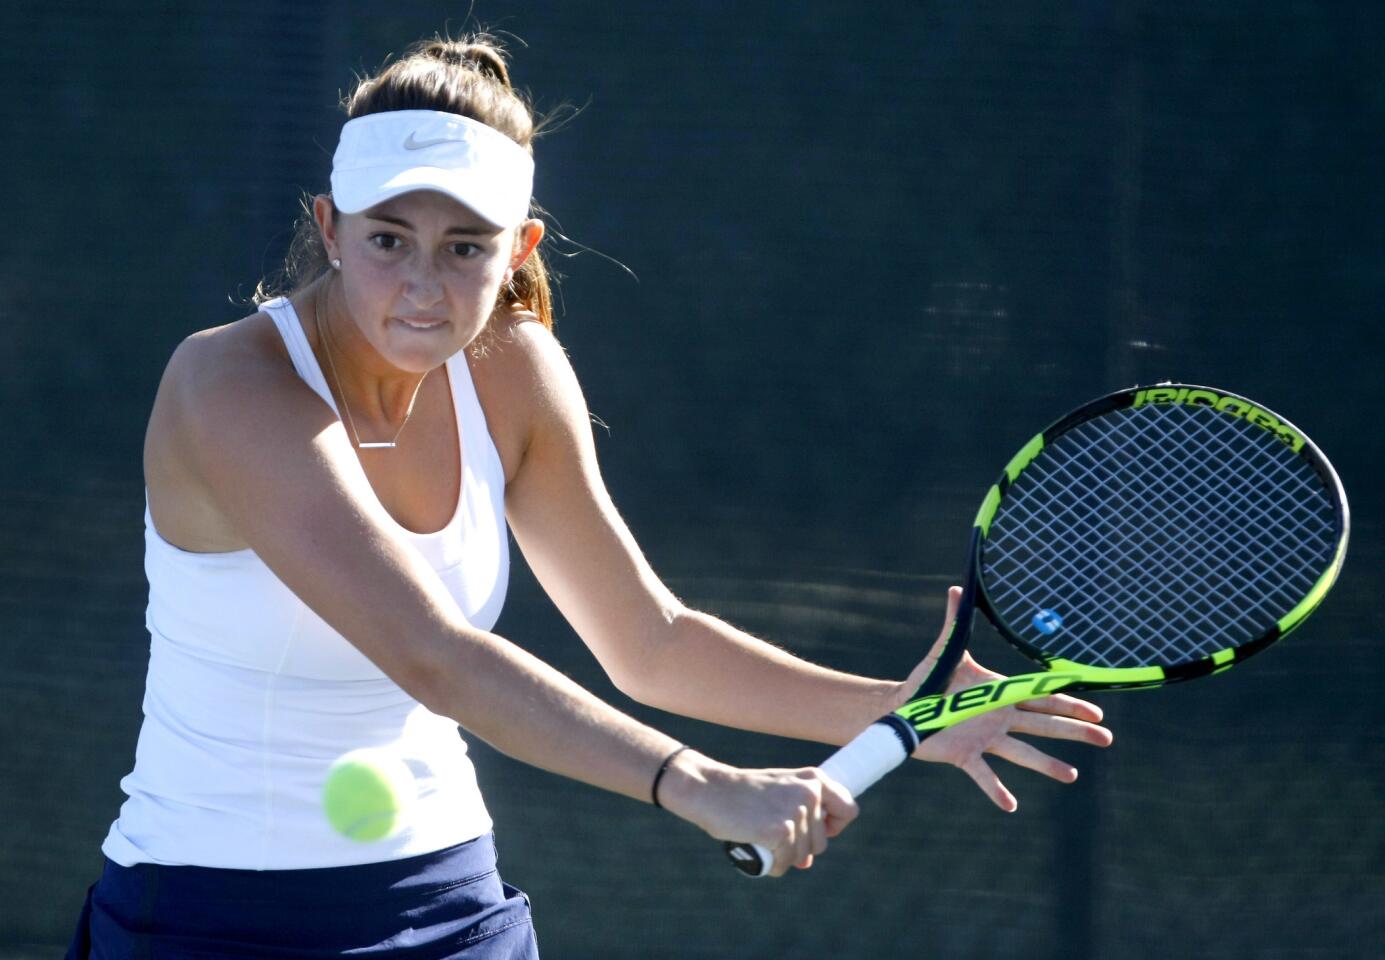 Corona Del Mar High School's singles tennis player Jasie Dunk returns the ball in play vs. Mayfair's Brianna Figueroa in the CIF SS Girls Individual Tennis Championships, Round of 32, at Whittier Narrows Tennis Center in South El Monte, on Tuessay, Nov. 29, 2016. Dunk won her match 6-1, 6-0.